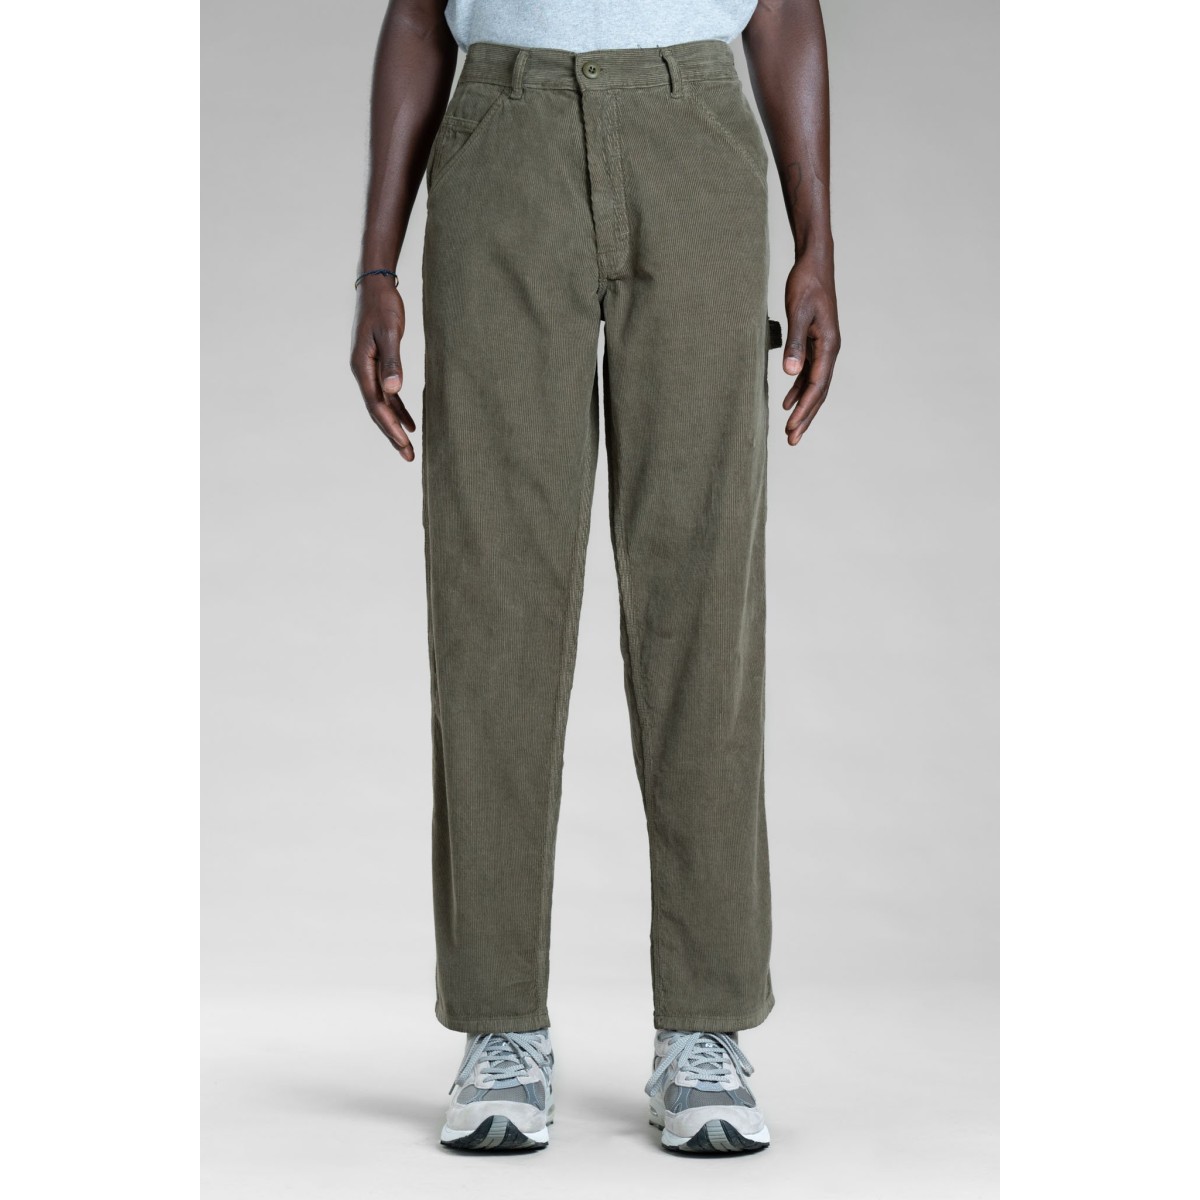 Stan ray recreation pant